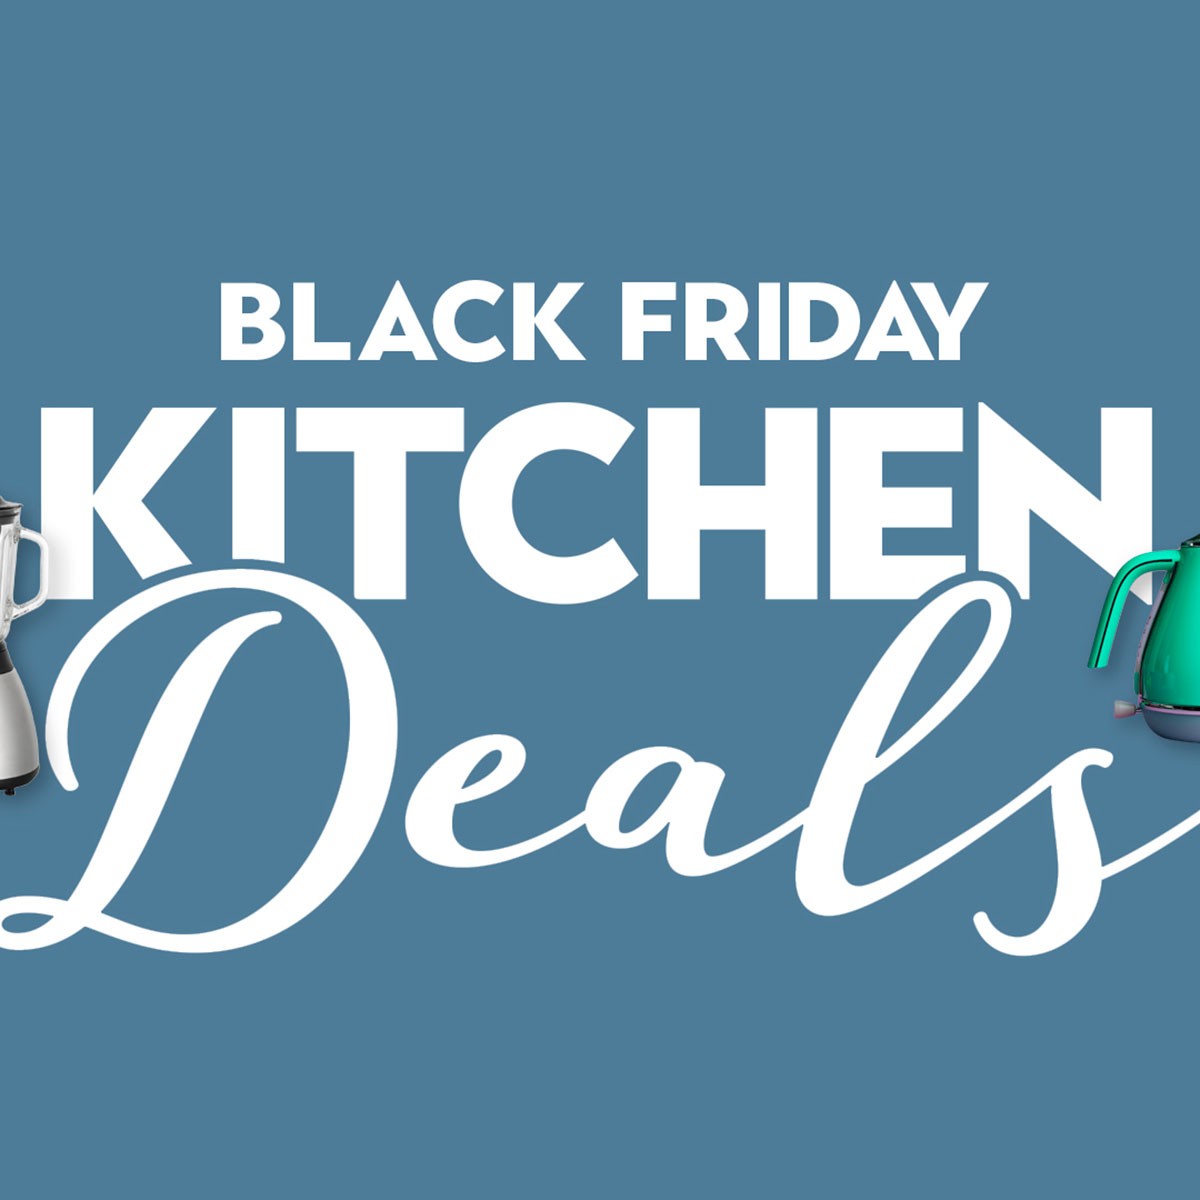 Black Friday kitchen deals you won't want to miss out on